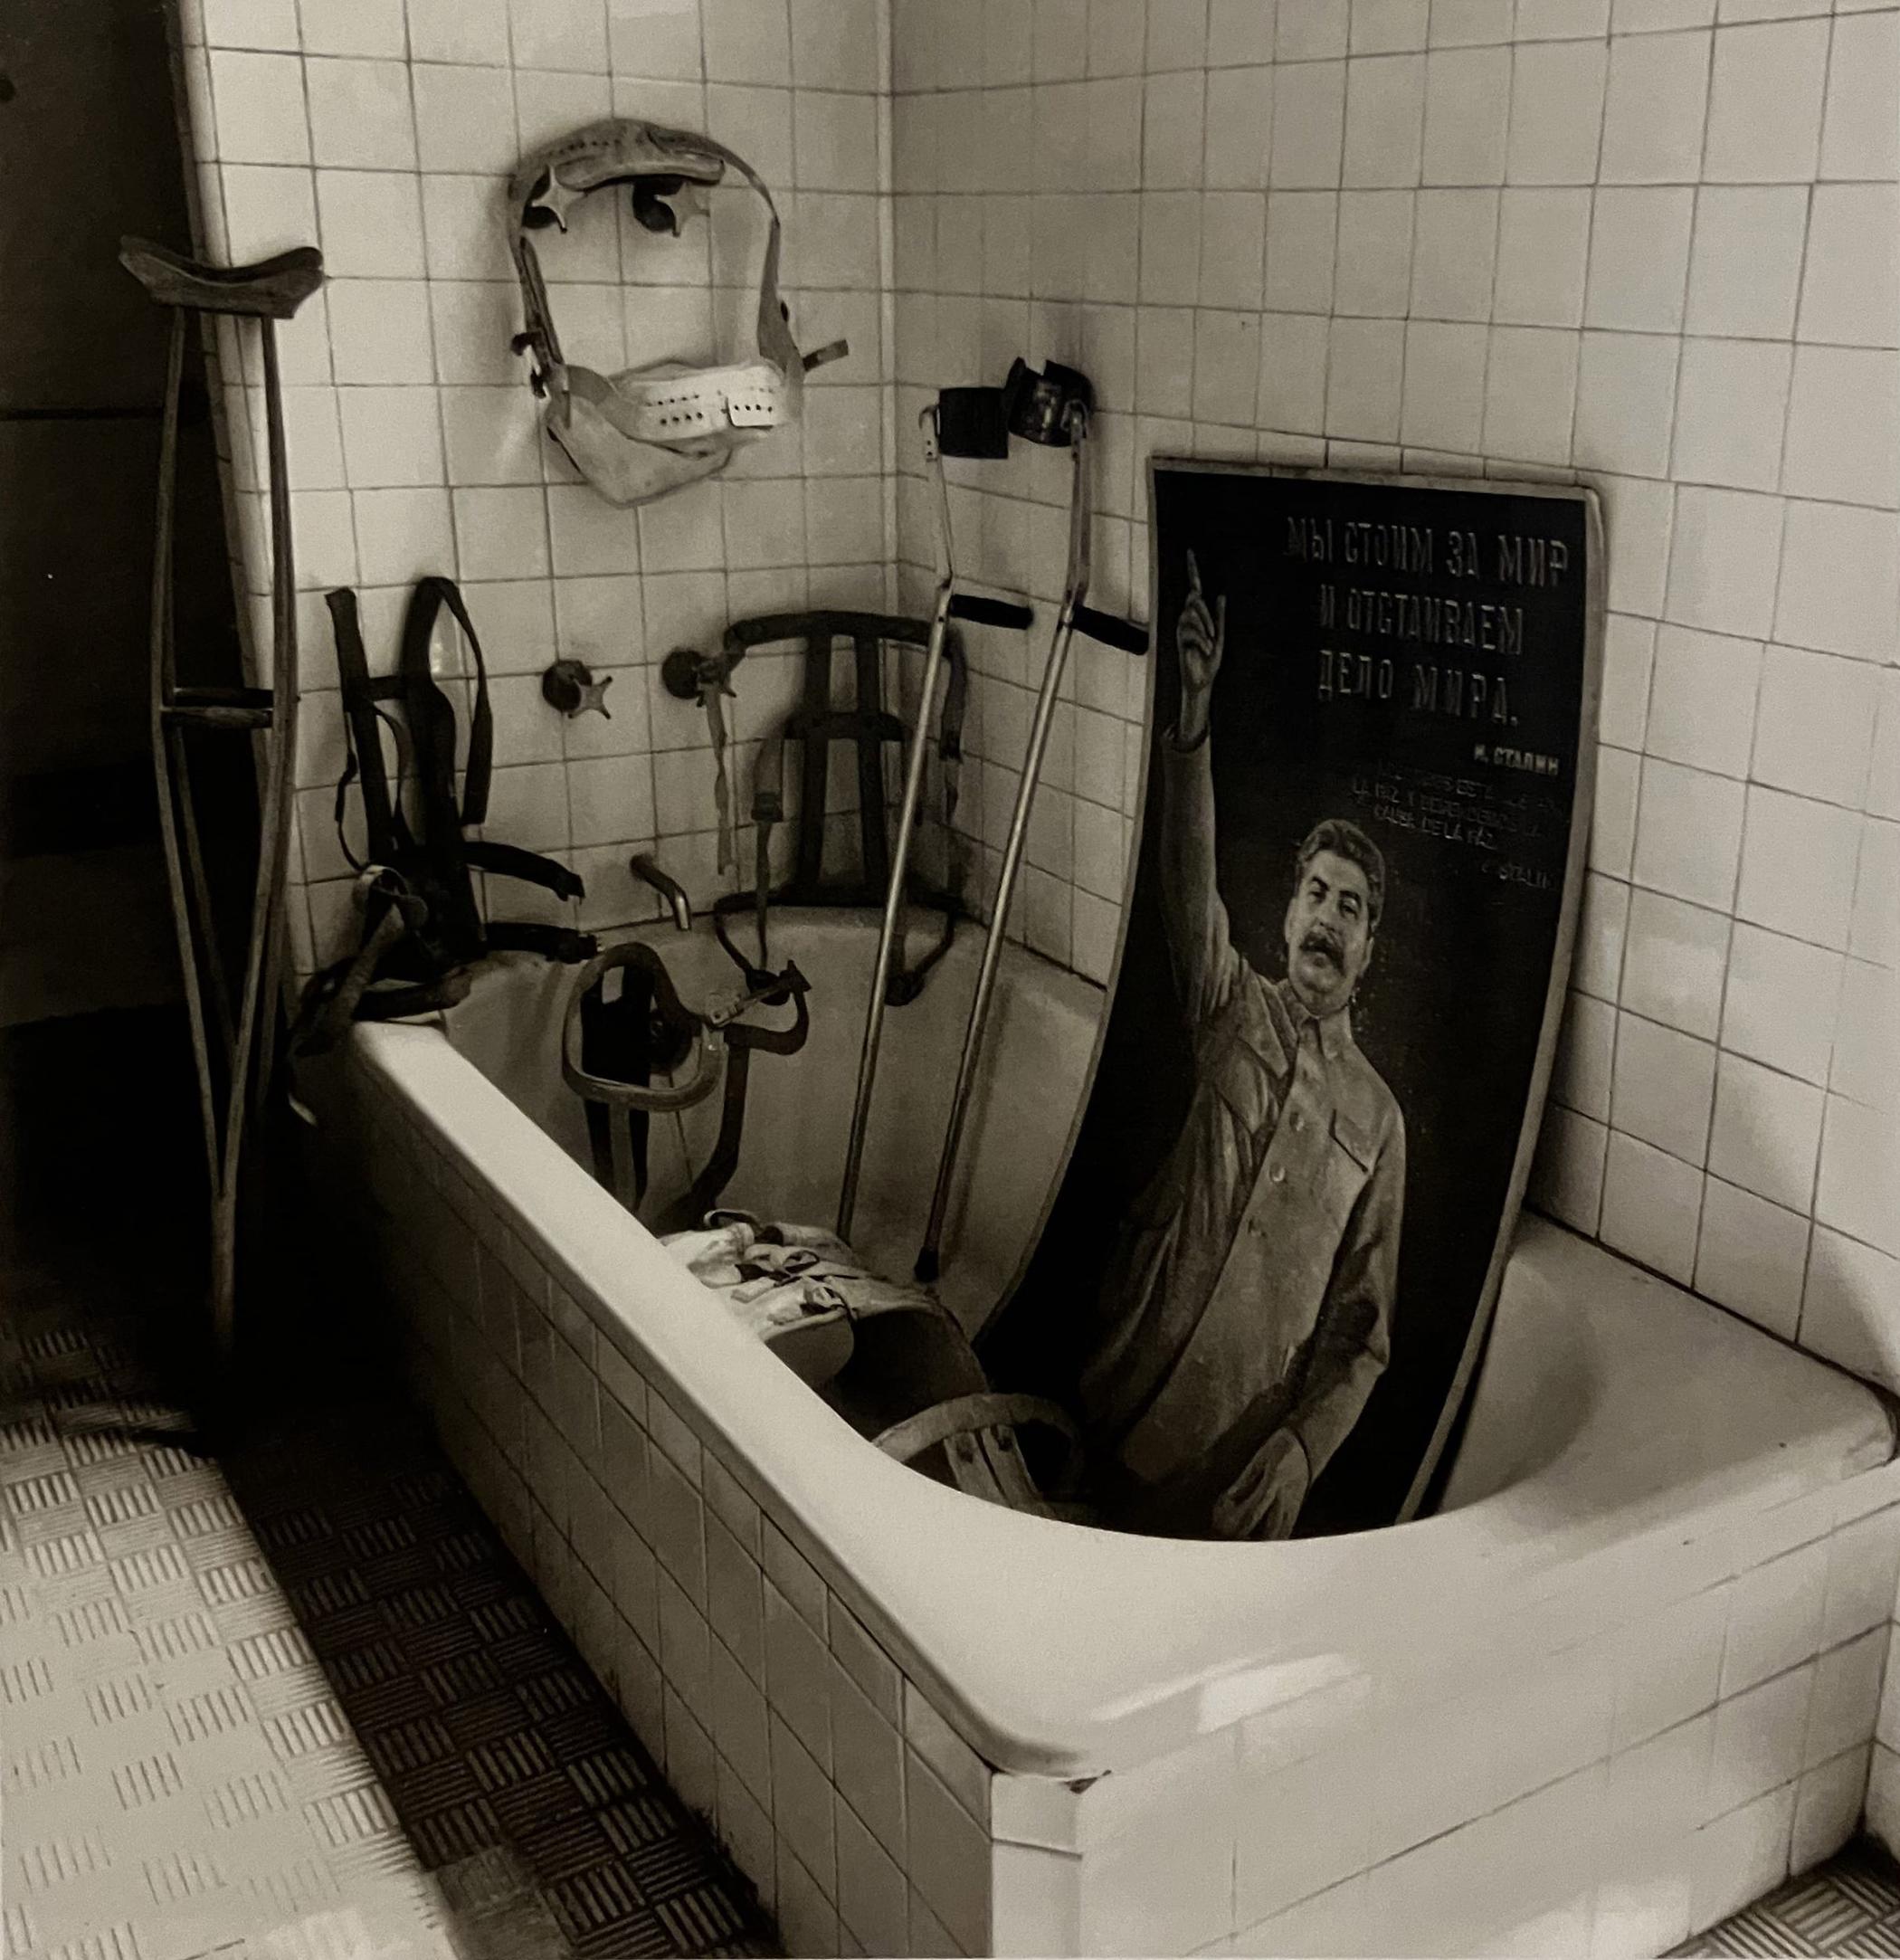 A black and white photograph of a white bathtub, a little bit dirty. The tiles on the wall are square and white. Clockwise, a big crutch is outside the tub, supported by the wall. Behind, on the tub, are some leather corsets. On the wall above, a used white plastic corset hung on two metal taps. Inside the bathtub, two crutches are leaning against the wall. Next to it a huge Soviet portrait of Joseph Stalin. In a military corporal expression, he raises his right arm, pointing upwards with his finger. There is a large plastic corset inside the bathtub, but we can't see the whole of it, only the top.